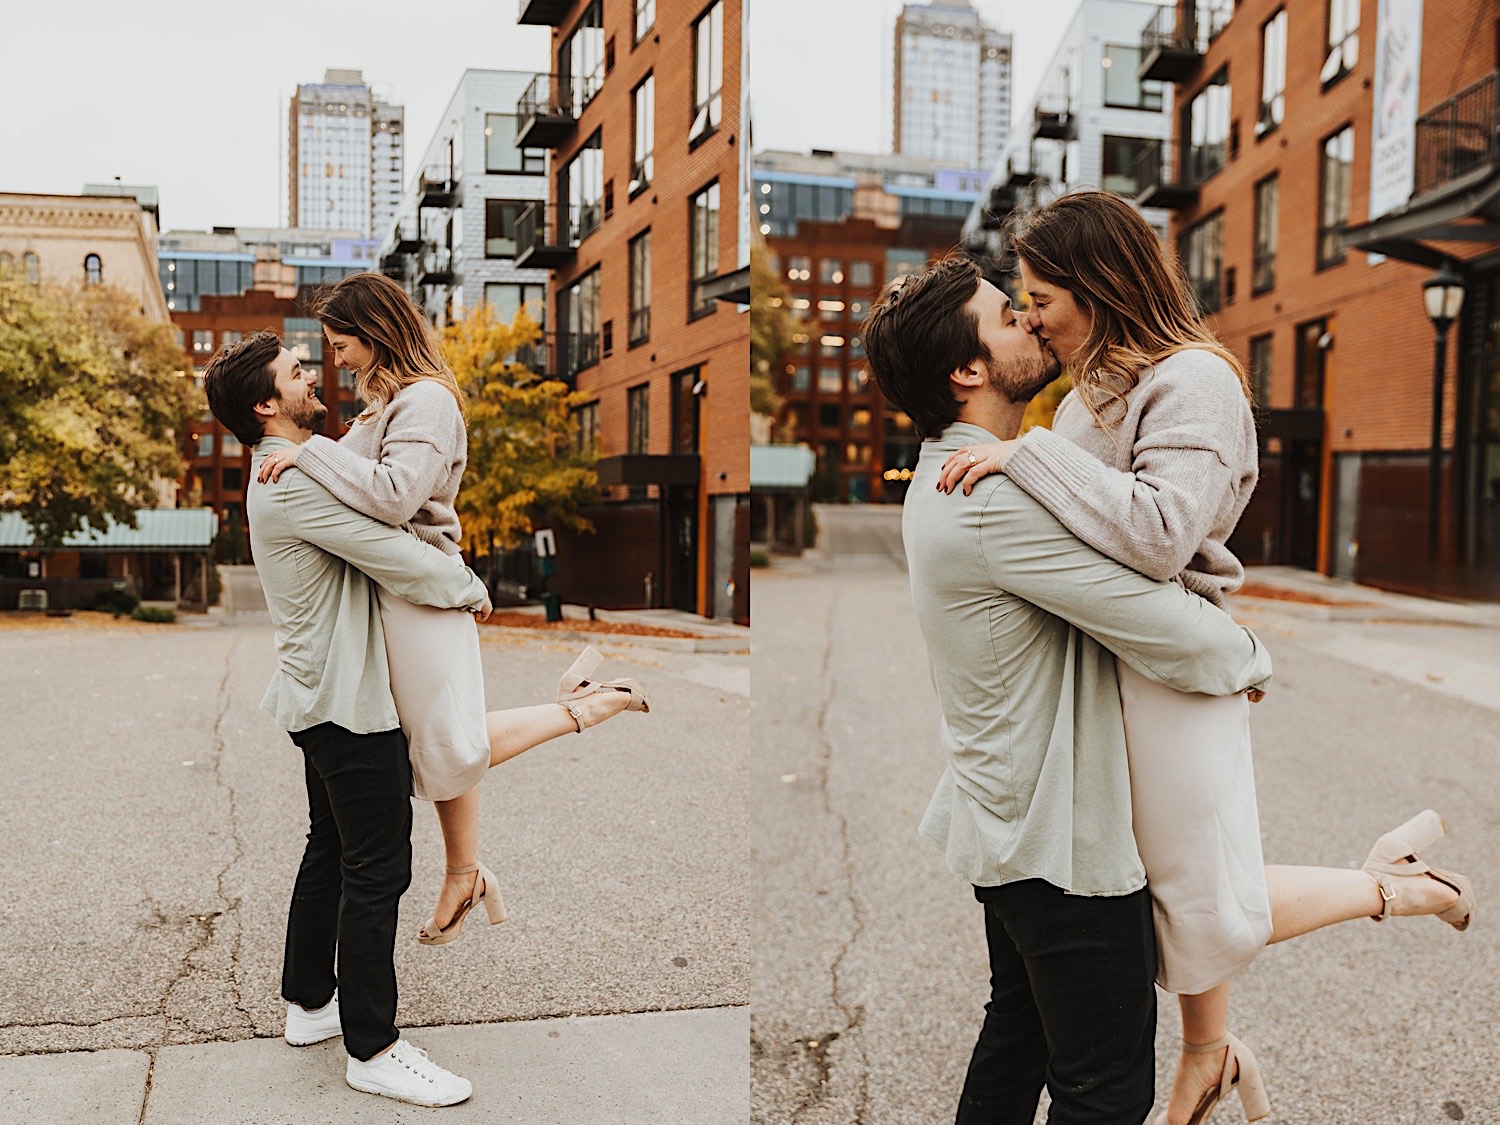 2 photos side by side of a couple in Minneapolis' North Loop where the man is lifting the woman in the air, in the left they smile at one another and in the right they are kissing